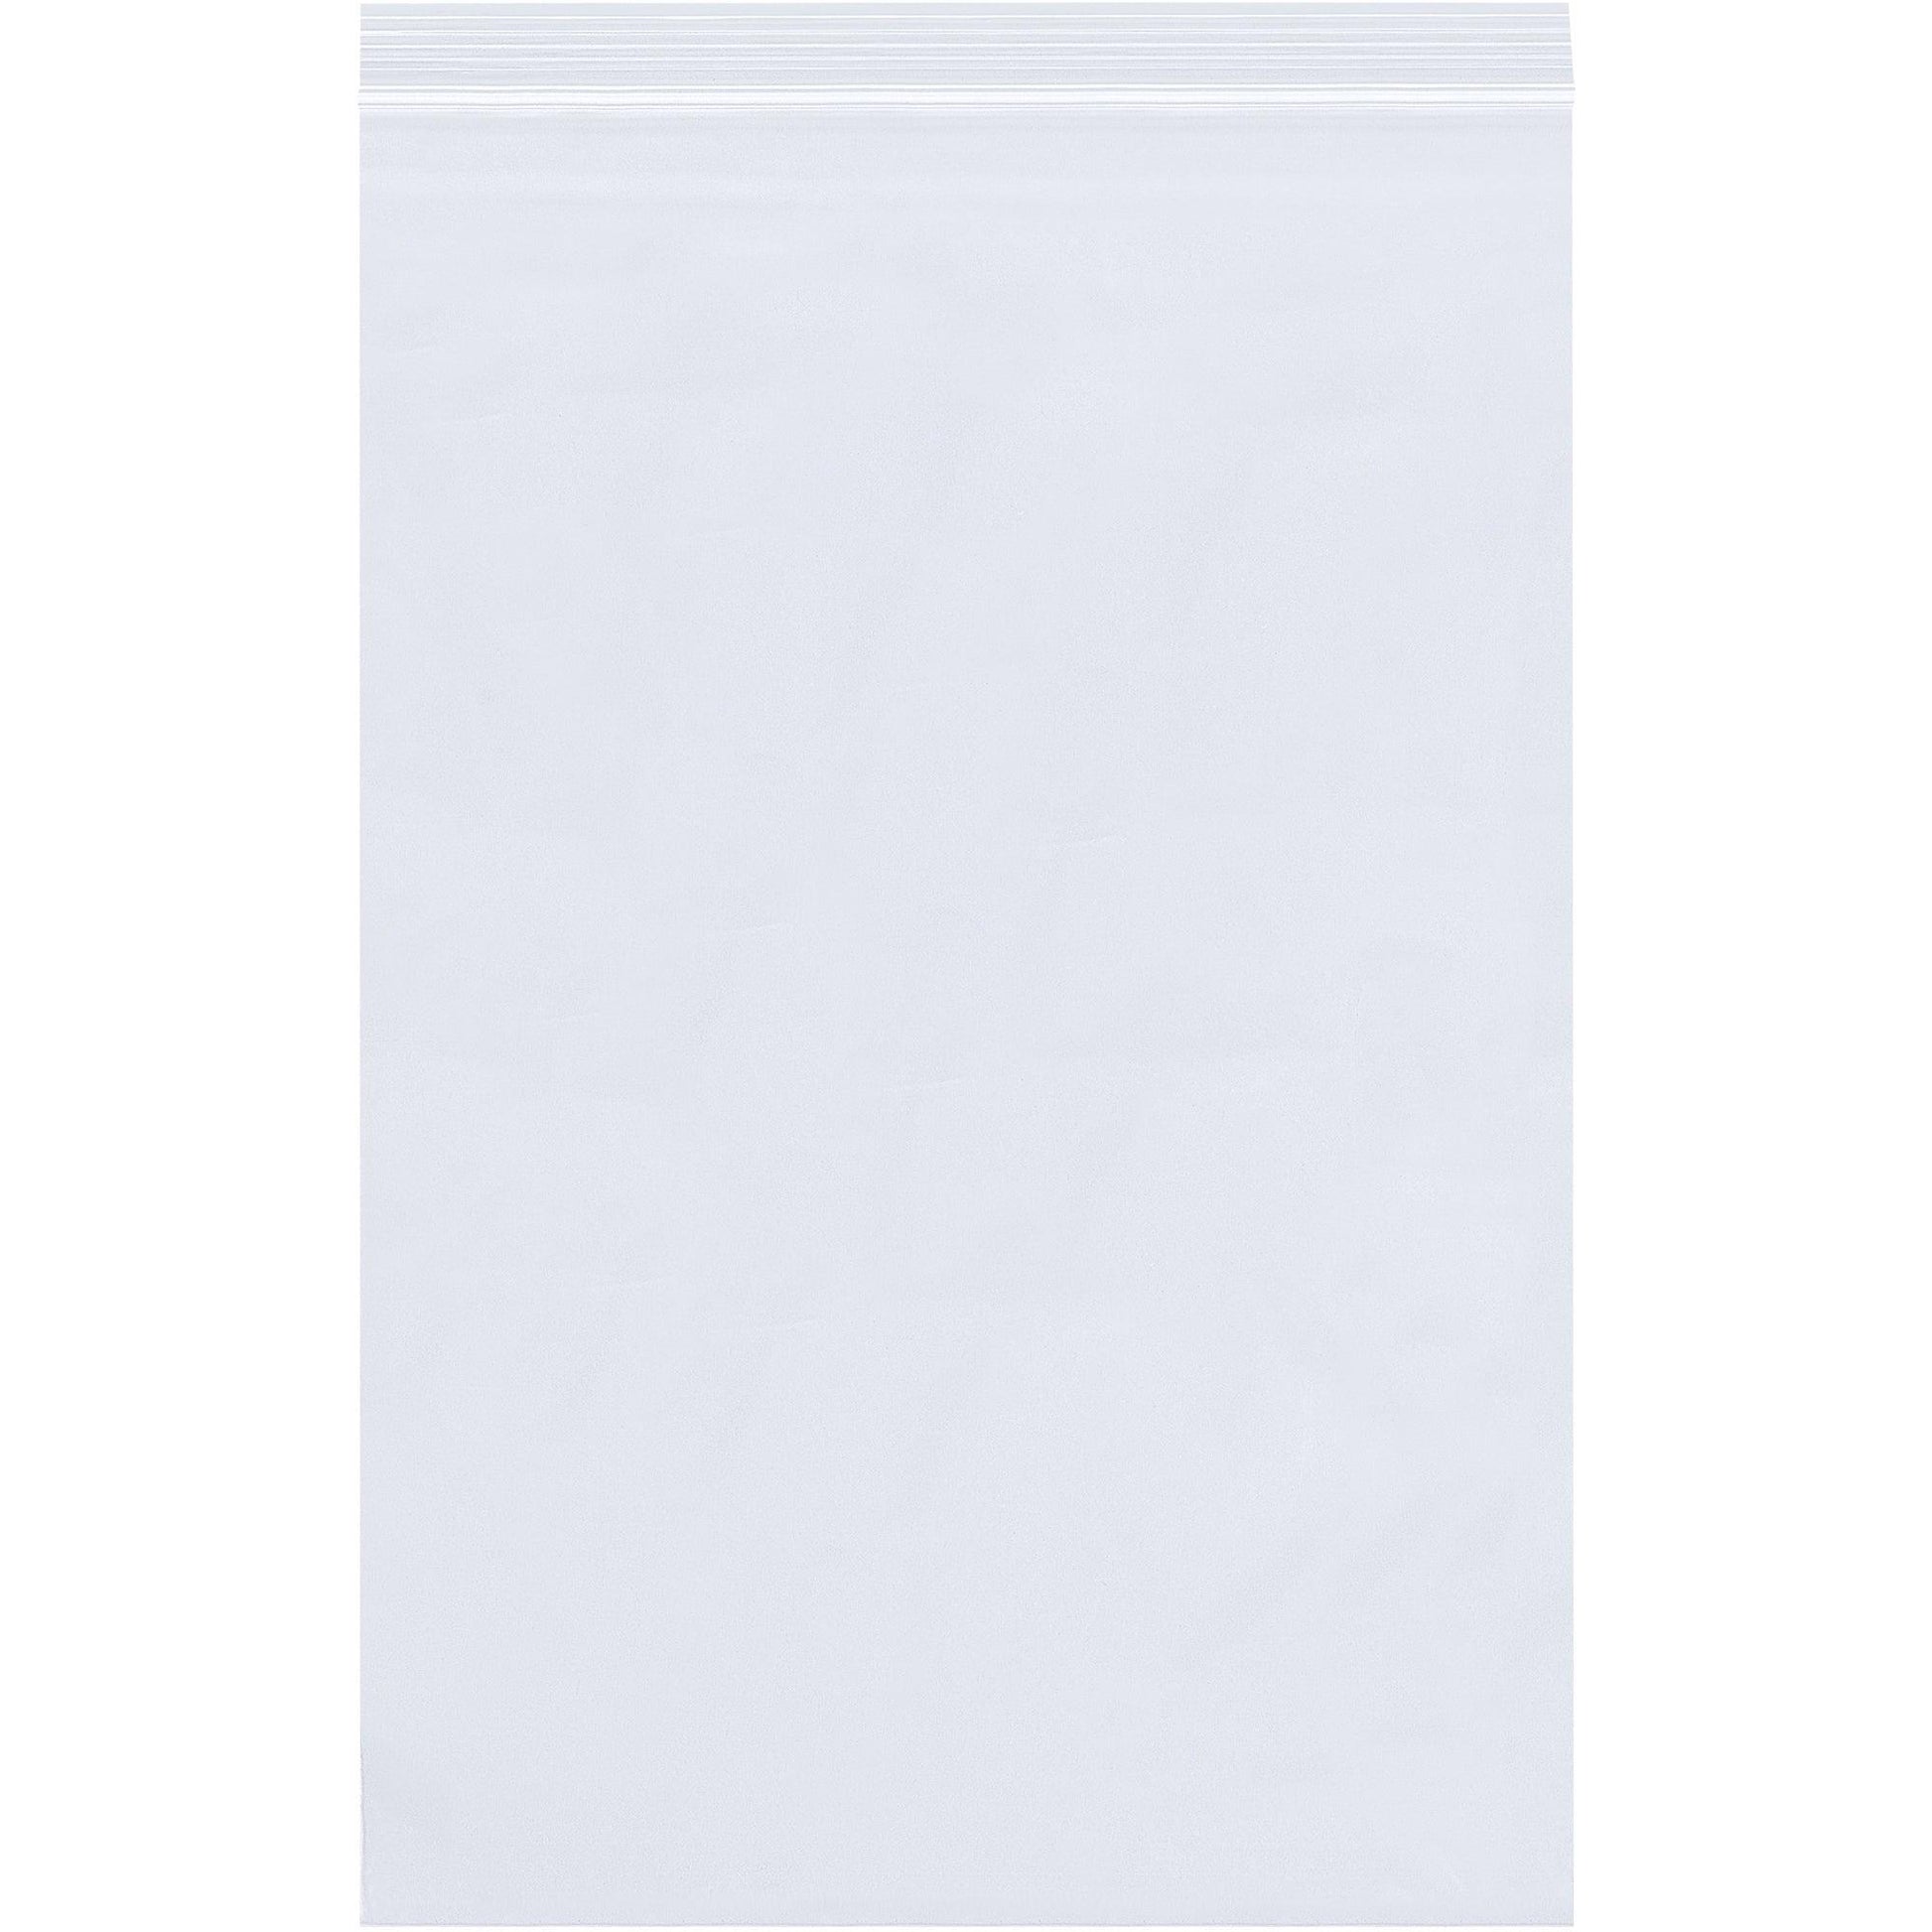 8 x 8" - 2 Mil Reclosable Poly Bags - PB3630